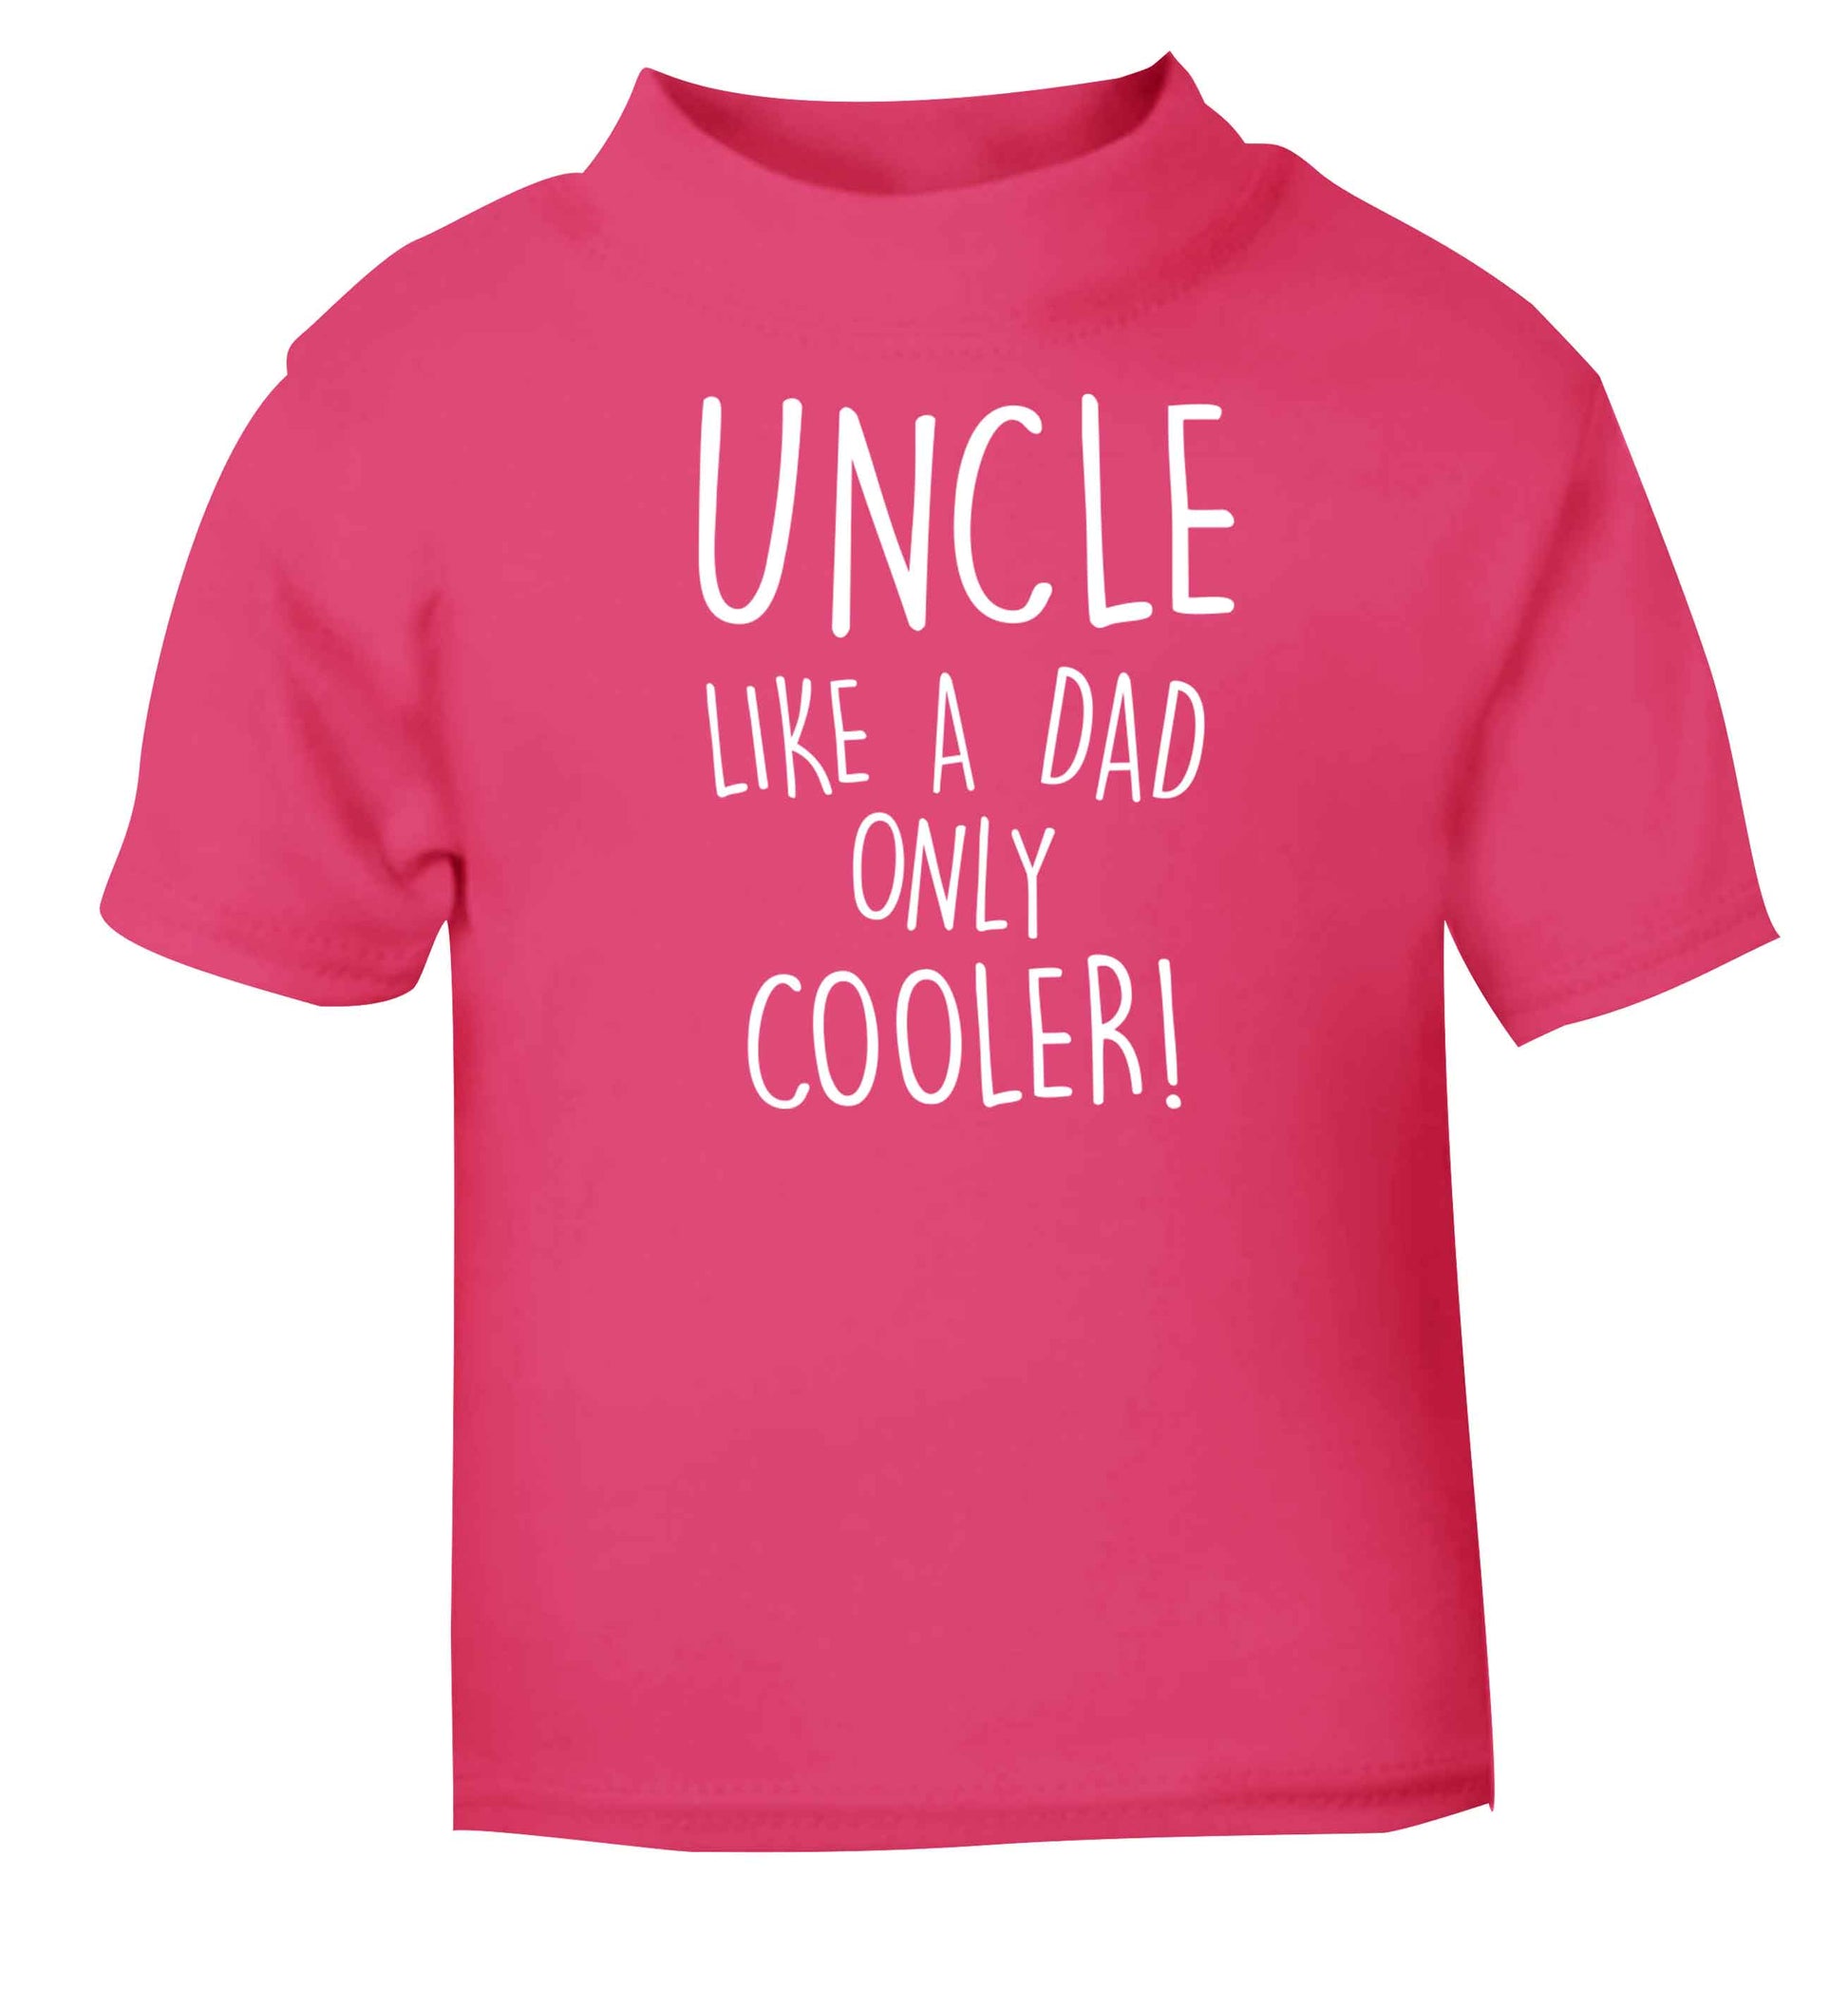 Uncle like a dad only cooler pink baby toddler Tshirt 2 Years